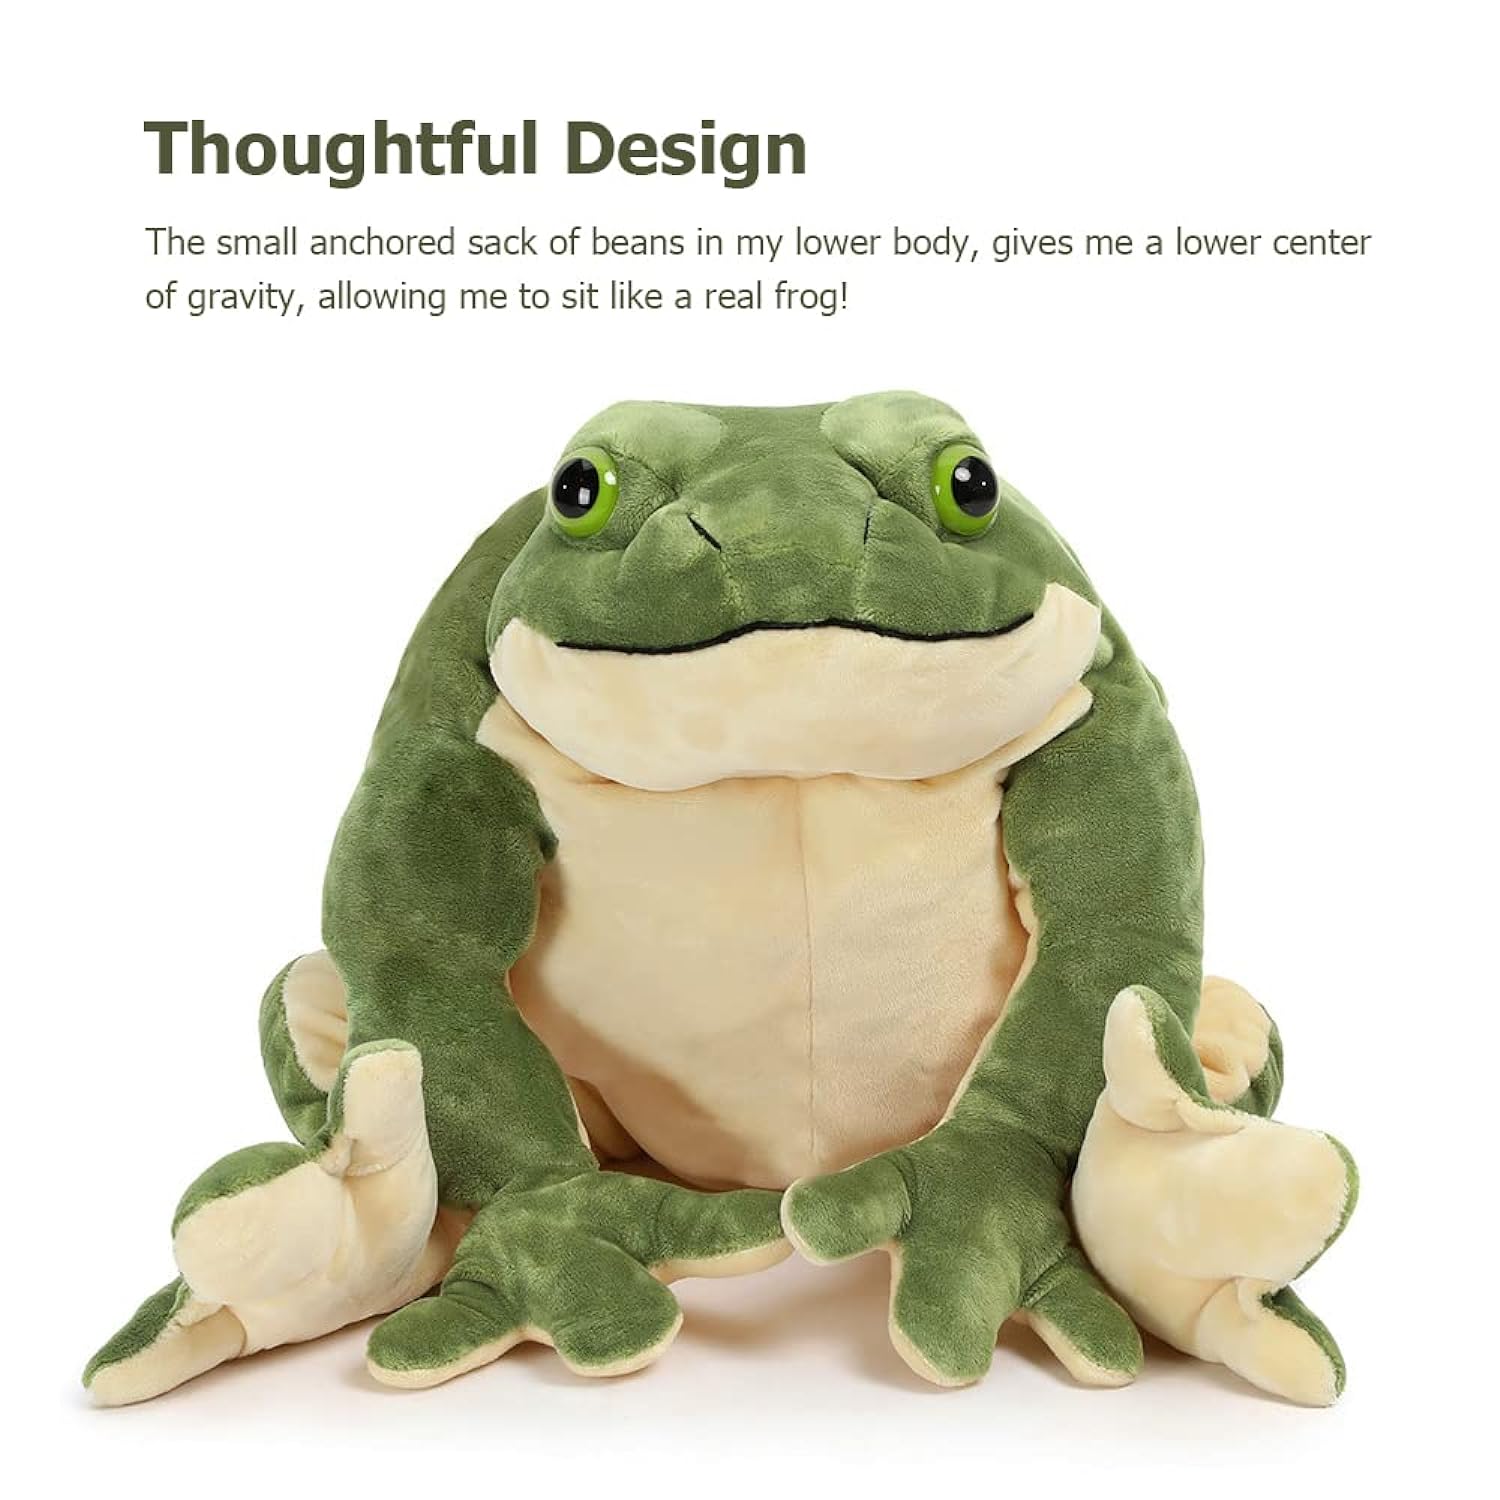 Great Choice Products Giant Frog Stuffed Animal Frog Plush, Large Stuffed Frog Plush, Big Stuffed Green Frog Pillow For Kids, 22 Inch